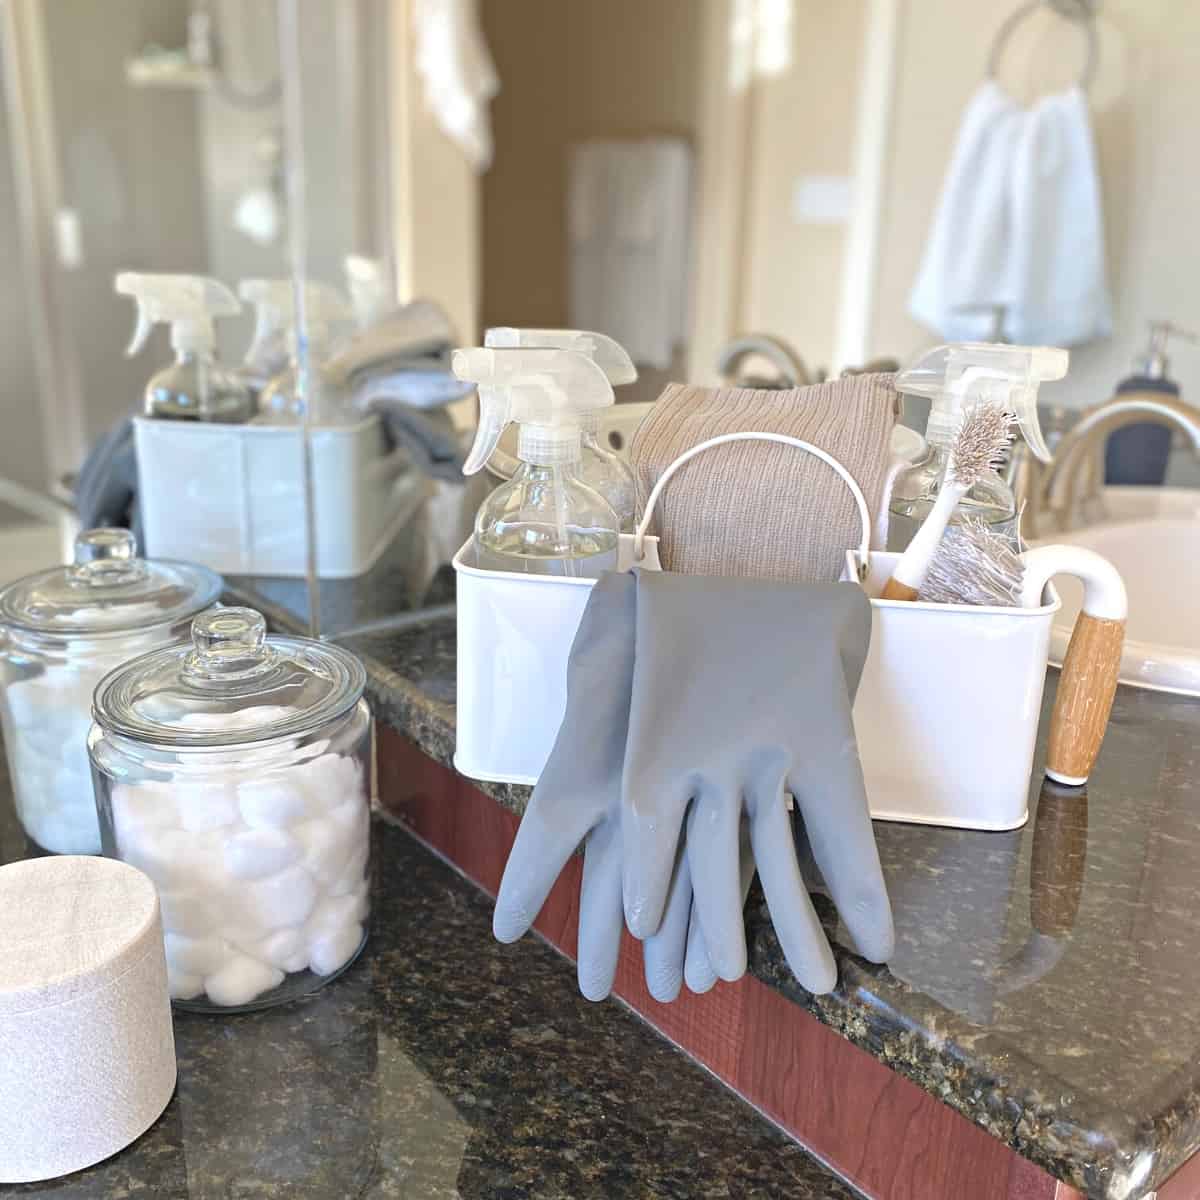 White bathroom caddy with cleaning products, gloves and towels